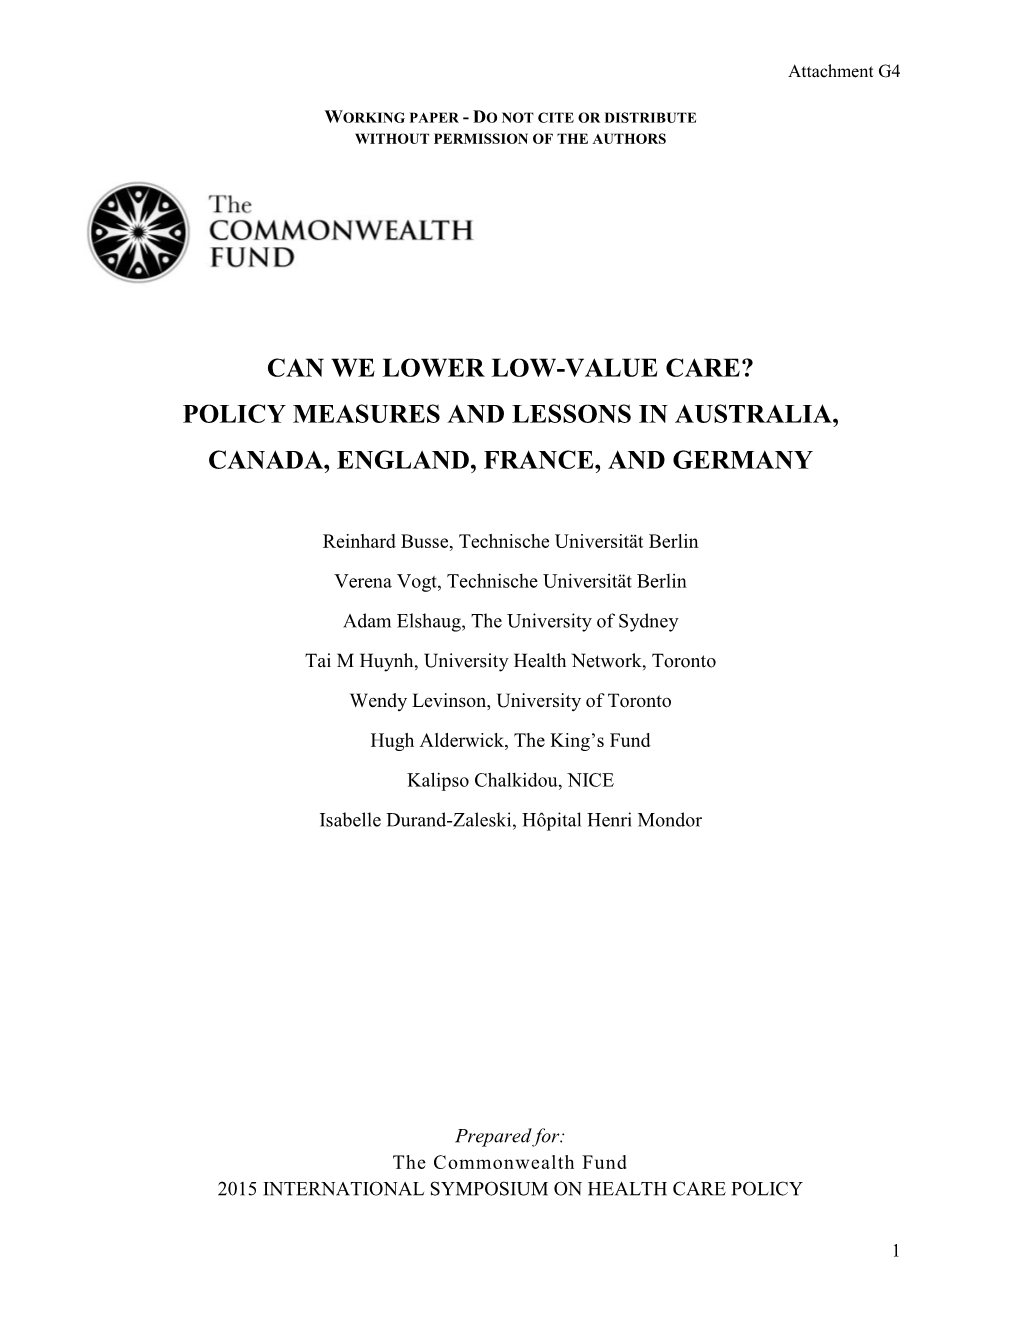 Can We Lower Low-Value Care? Policy Measures and Lessons in Australia